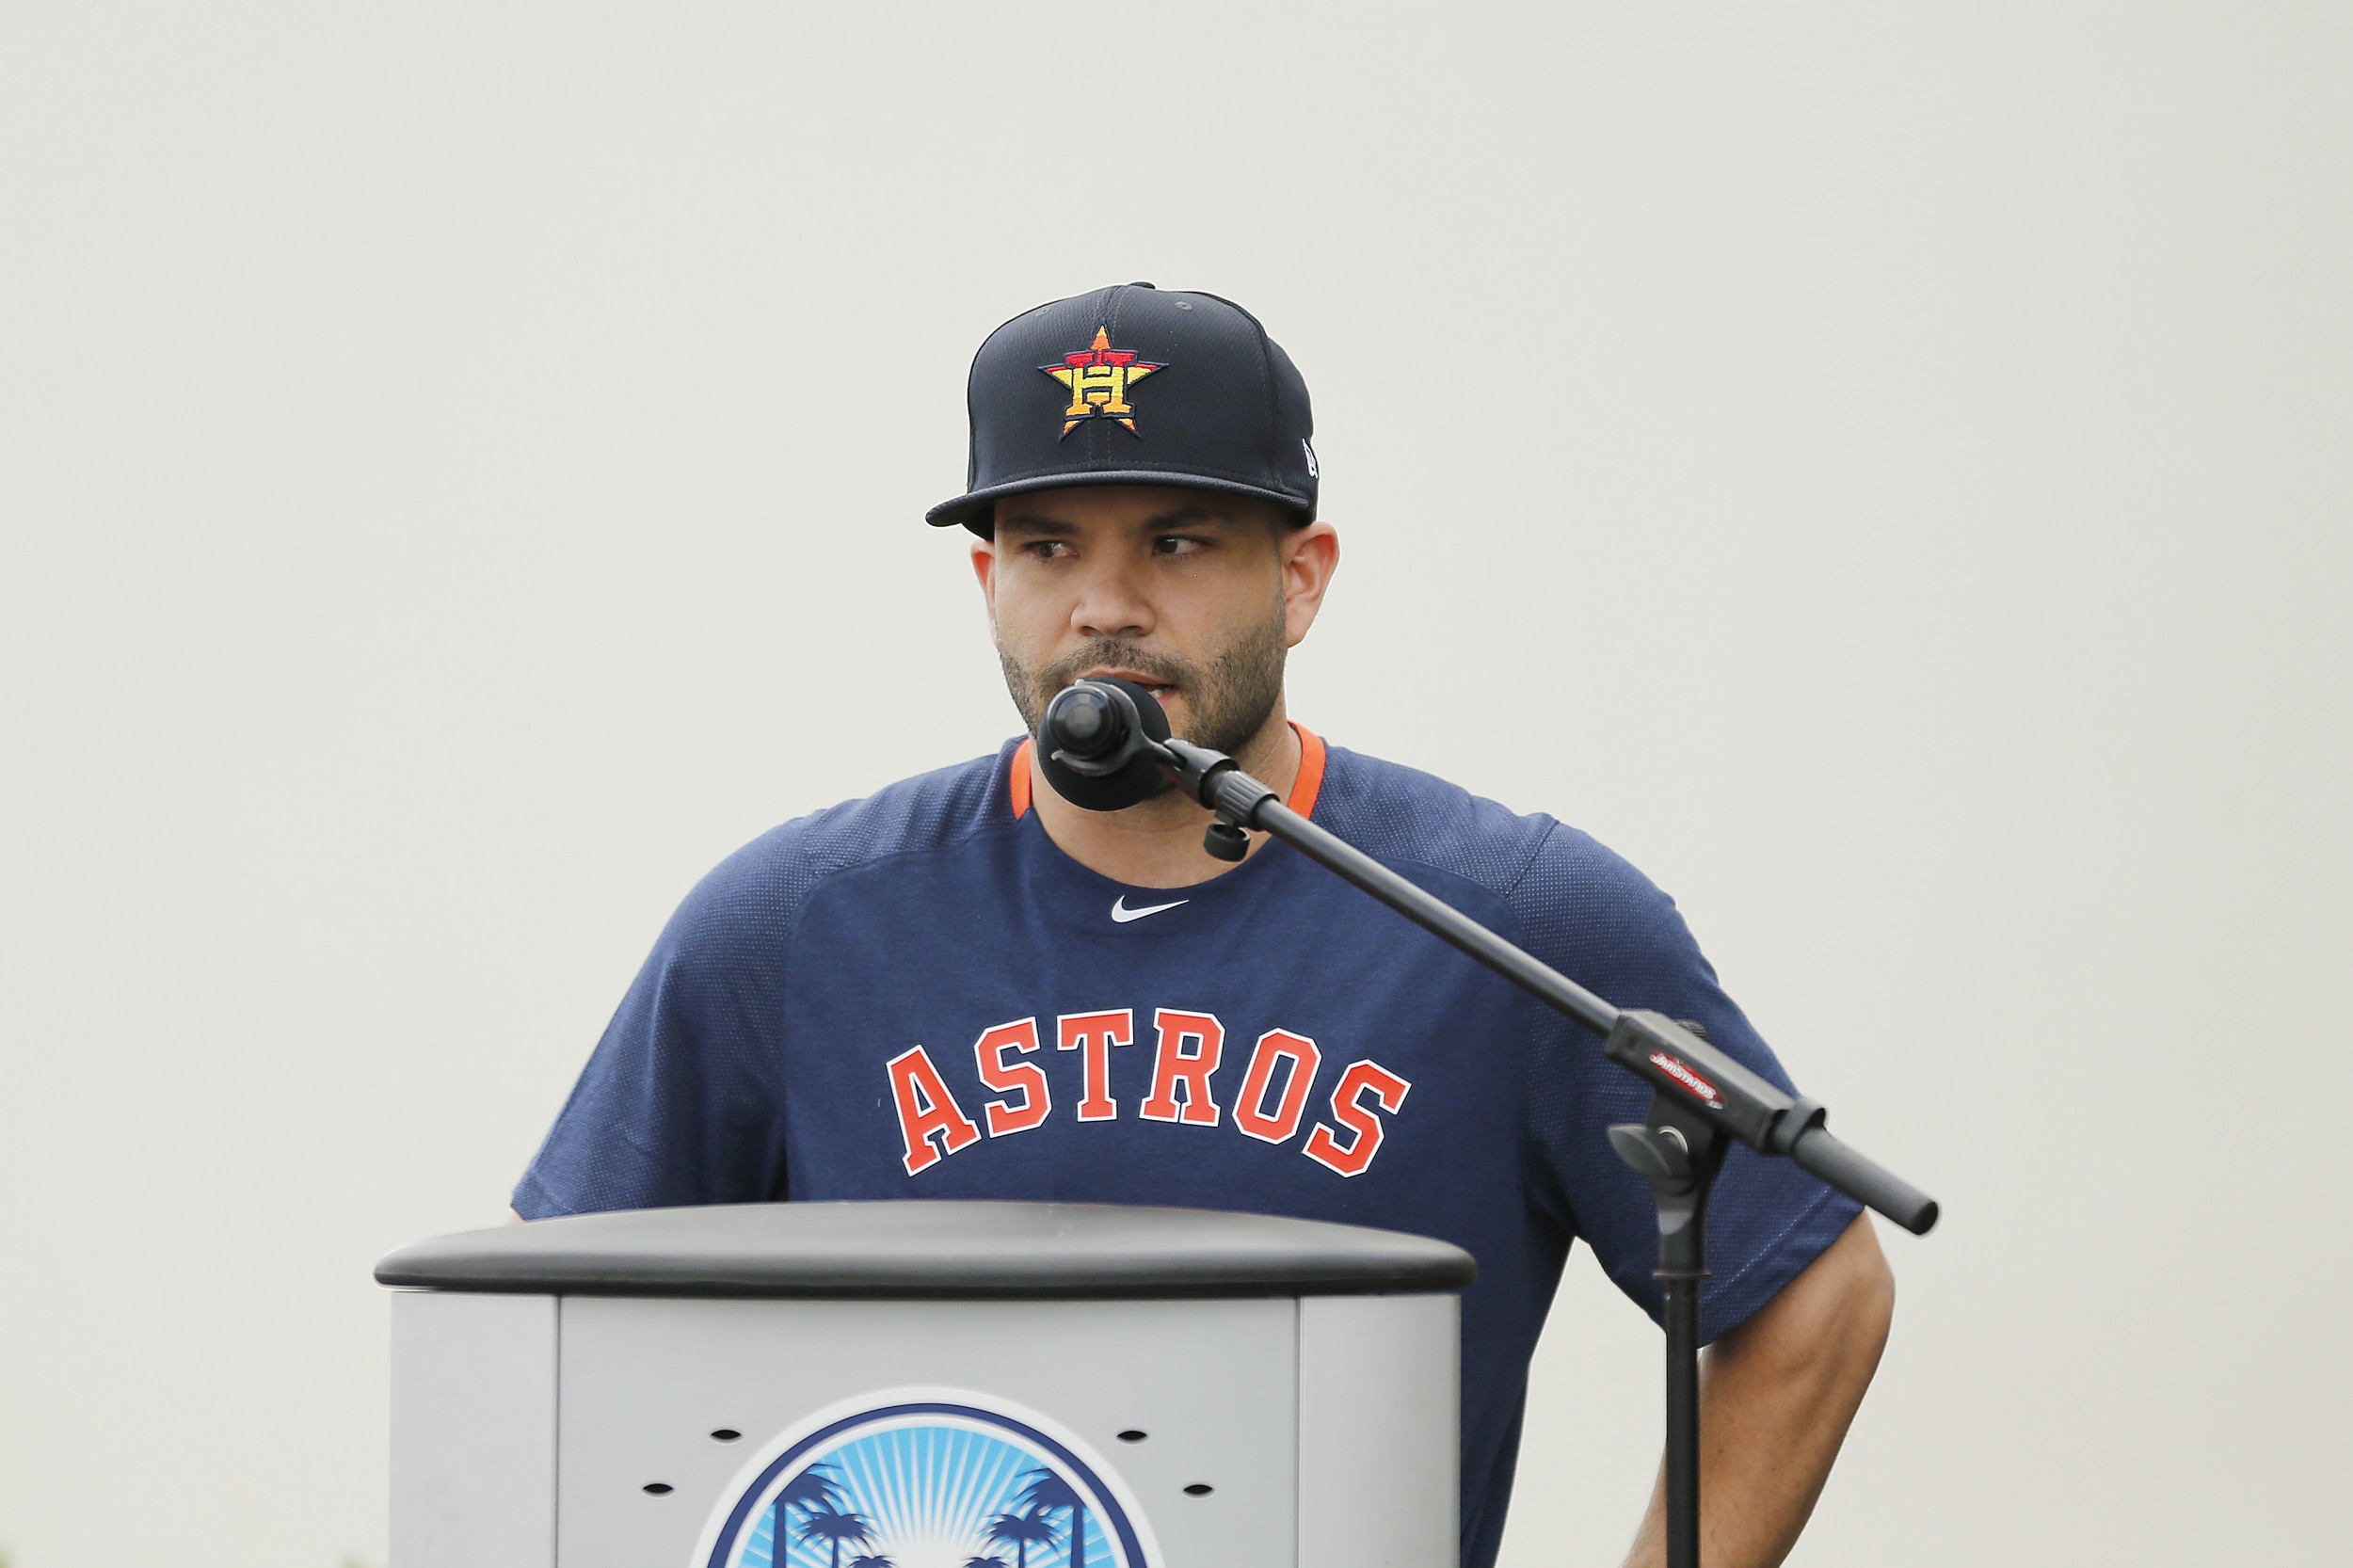 Astros Cheating in 2019 ALCS? Don't Rip My Shirt! - José Altuve 